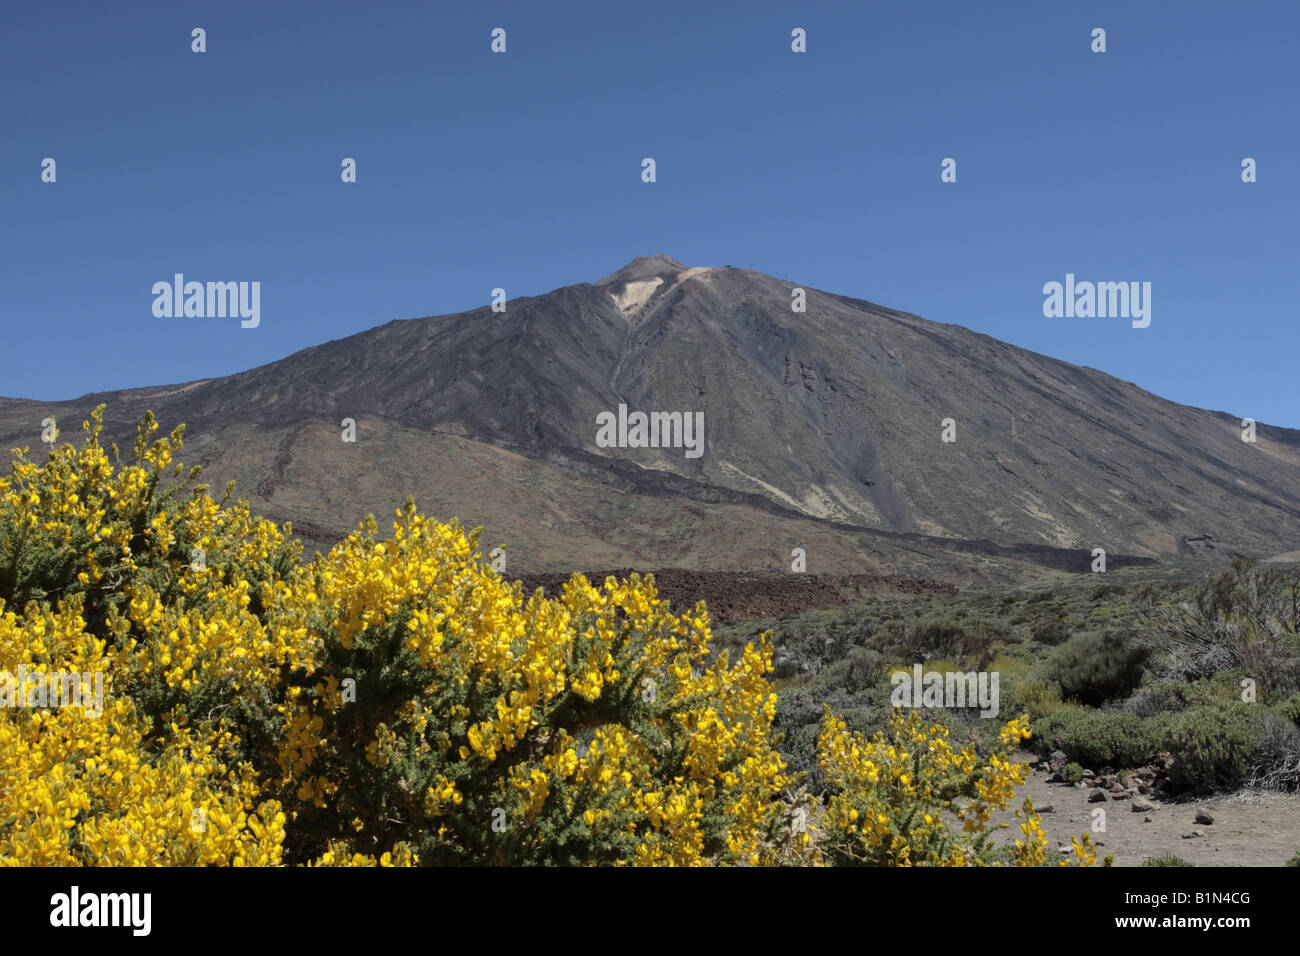 Mount Teide rises up behind a bright yellow Gorse bush in June Las Canadas del Teide national park Tenerife Canary Islands Stock Photo